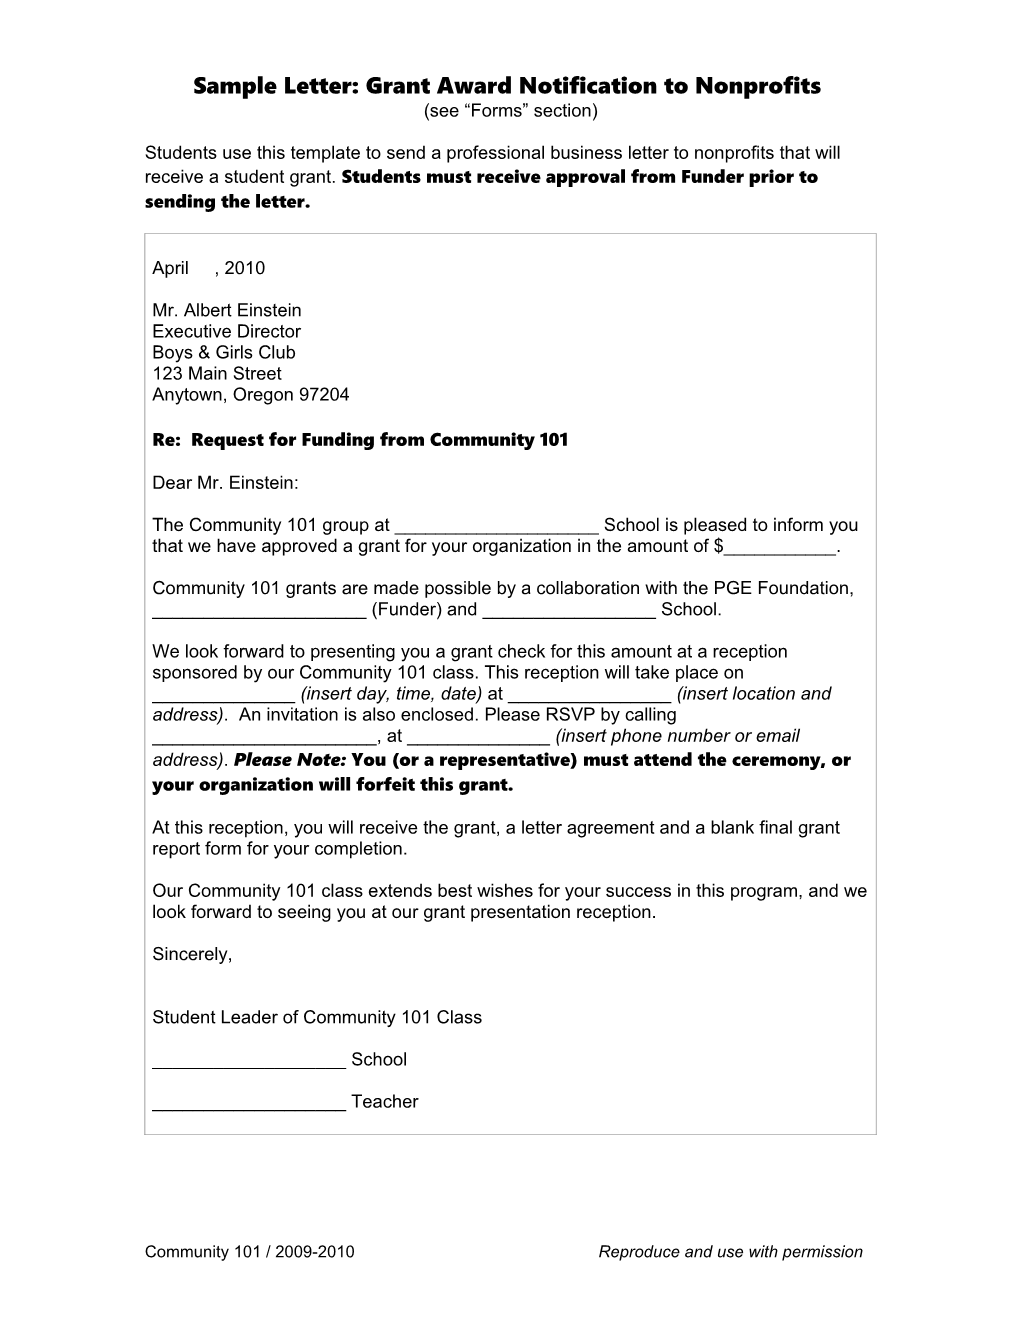 Sample Letter: Grant Award Notification to Nonprofits